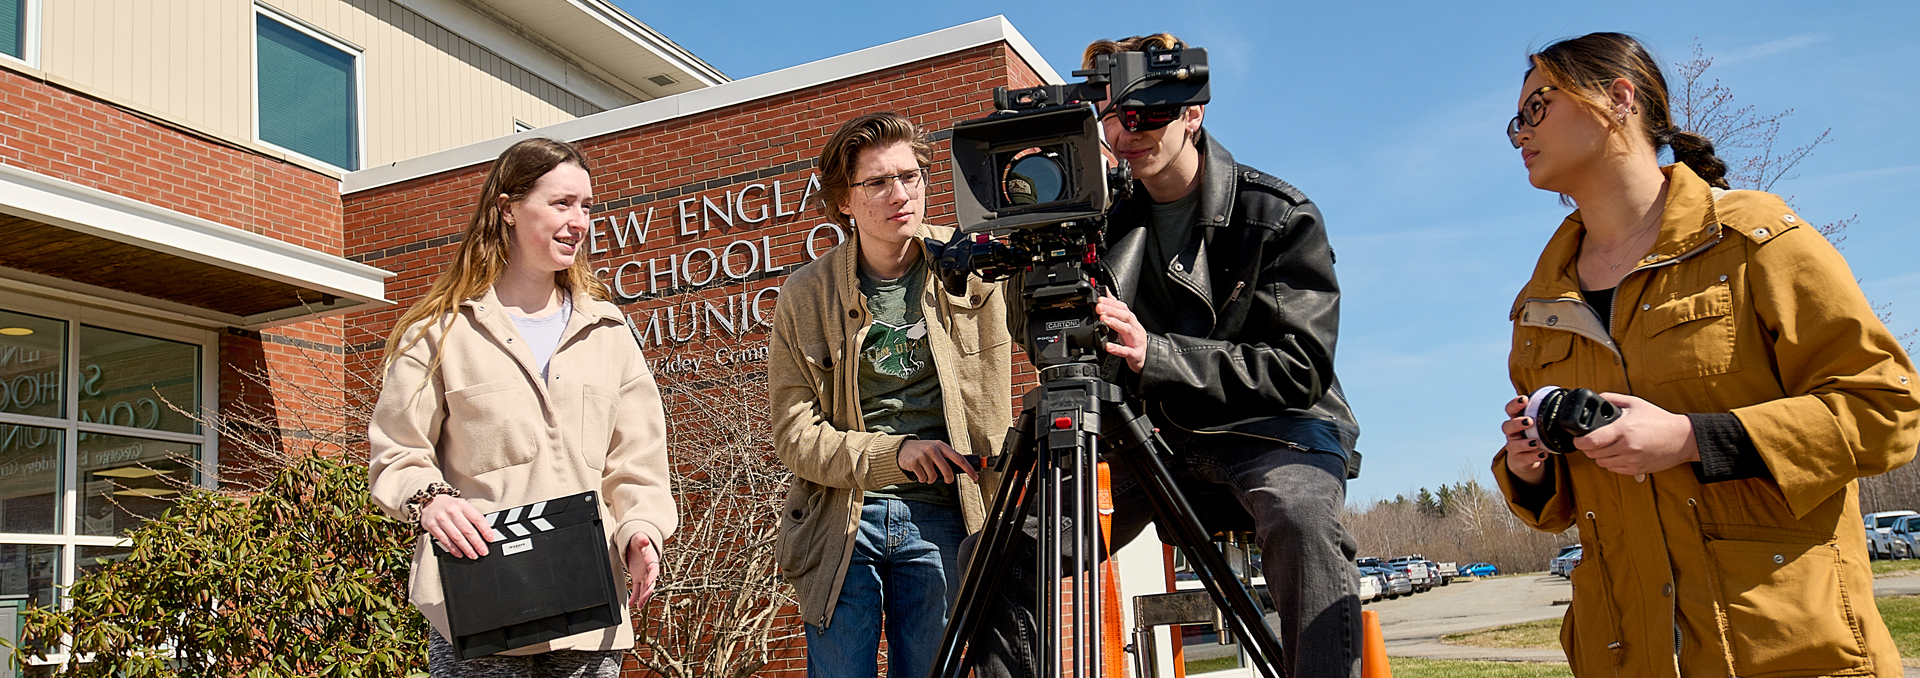 Students work on a camera during an outdoor video shoot